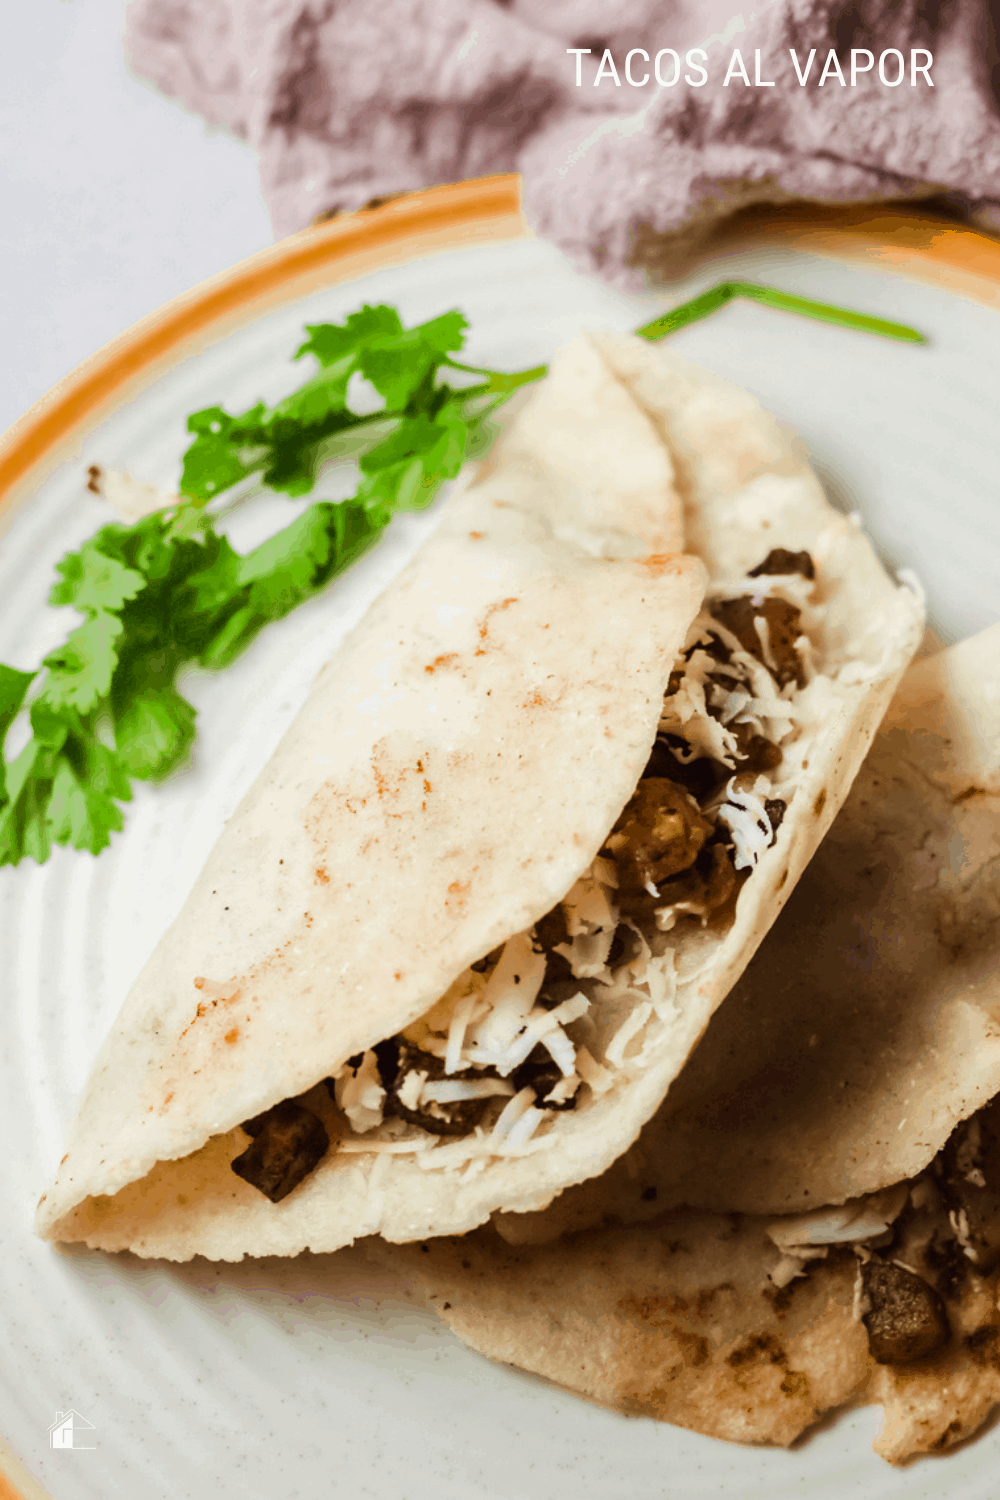 Delicious tacos al vapor or steamed tacos are popular with street vendors. Create your own version of tacos al vapor in your home. via @mystayathome